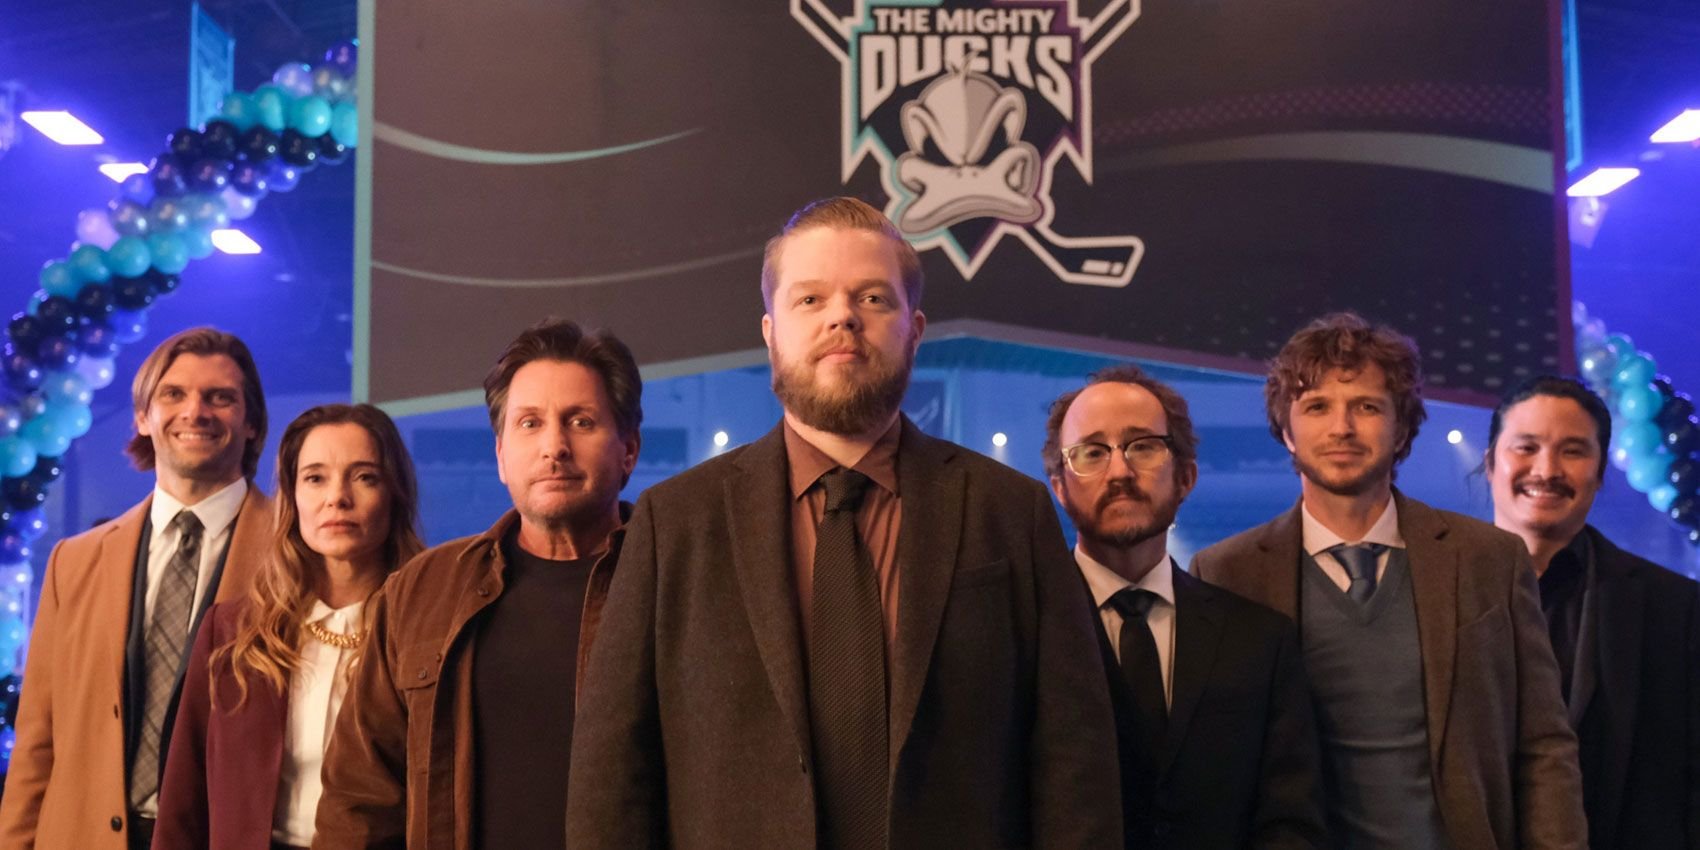 'The Mighty Ducks: Game Changers' Producer Steve Brill on the Show's Future and How He Got Emilio Estevez to Return